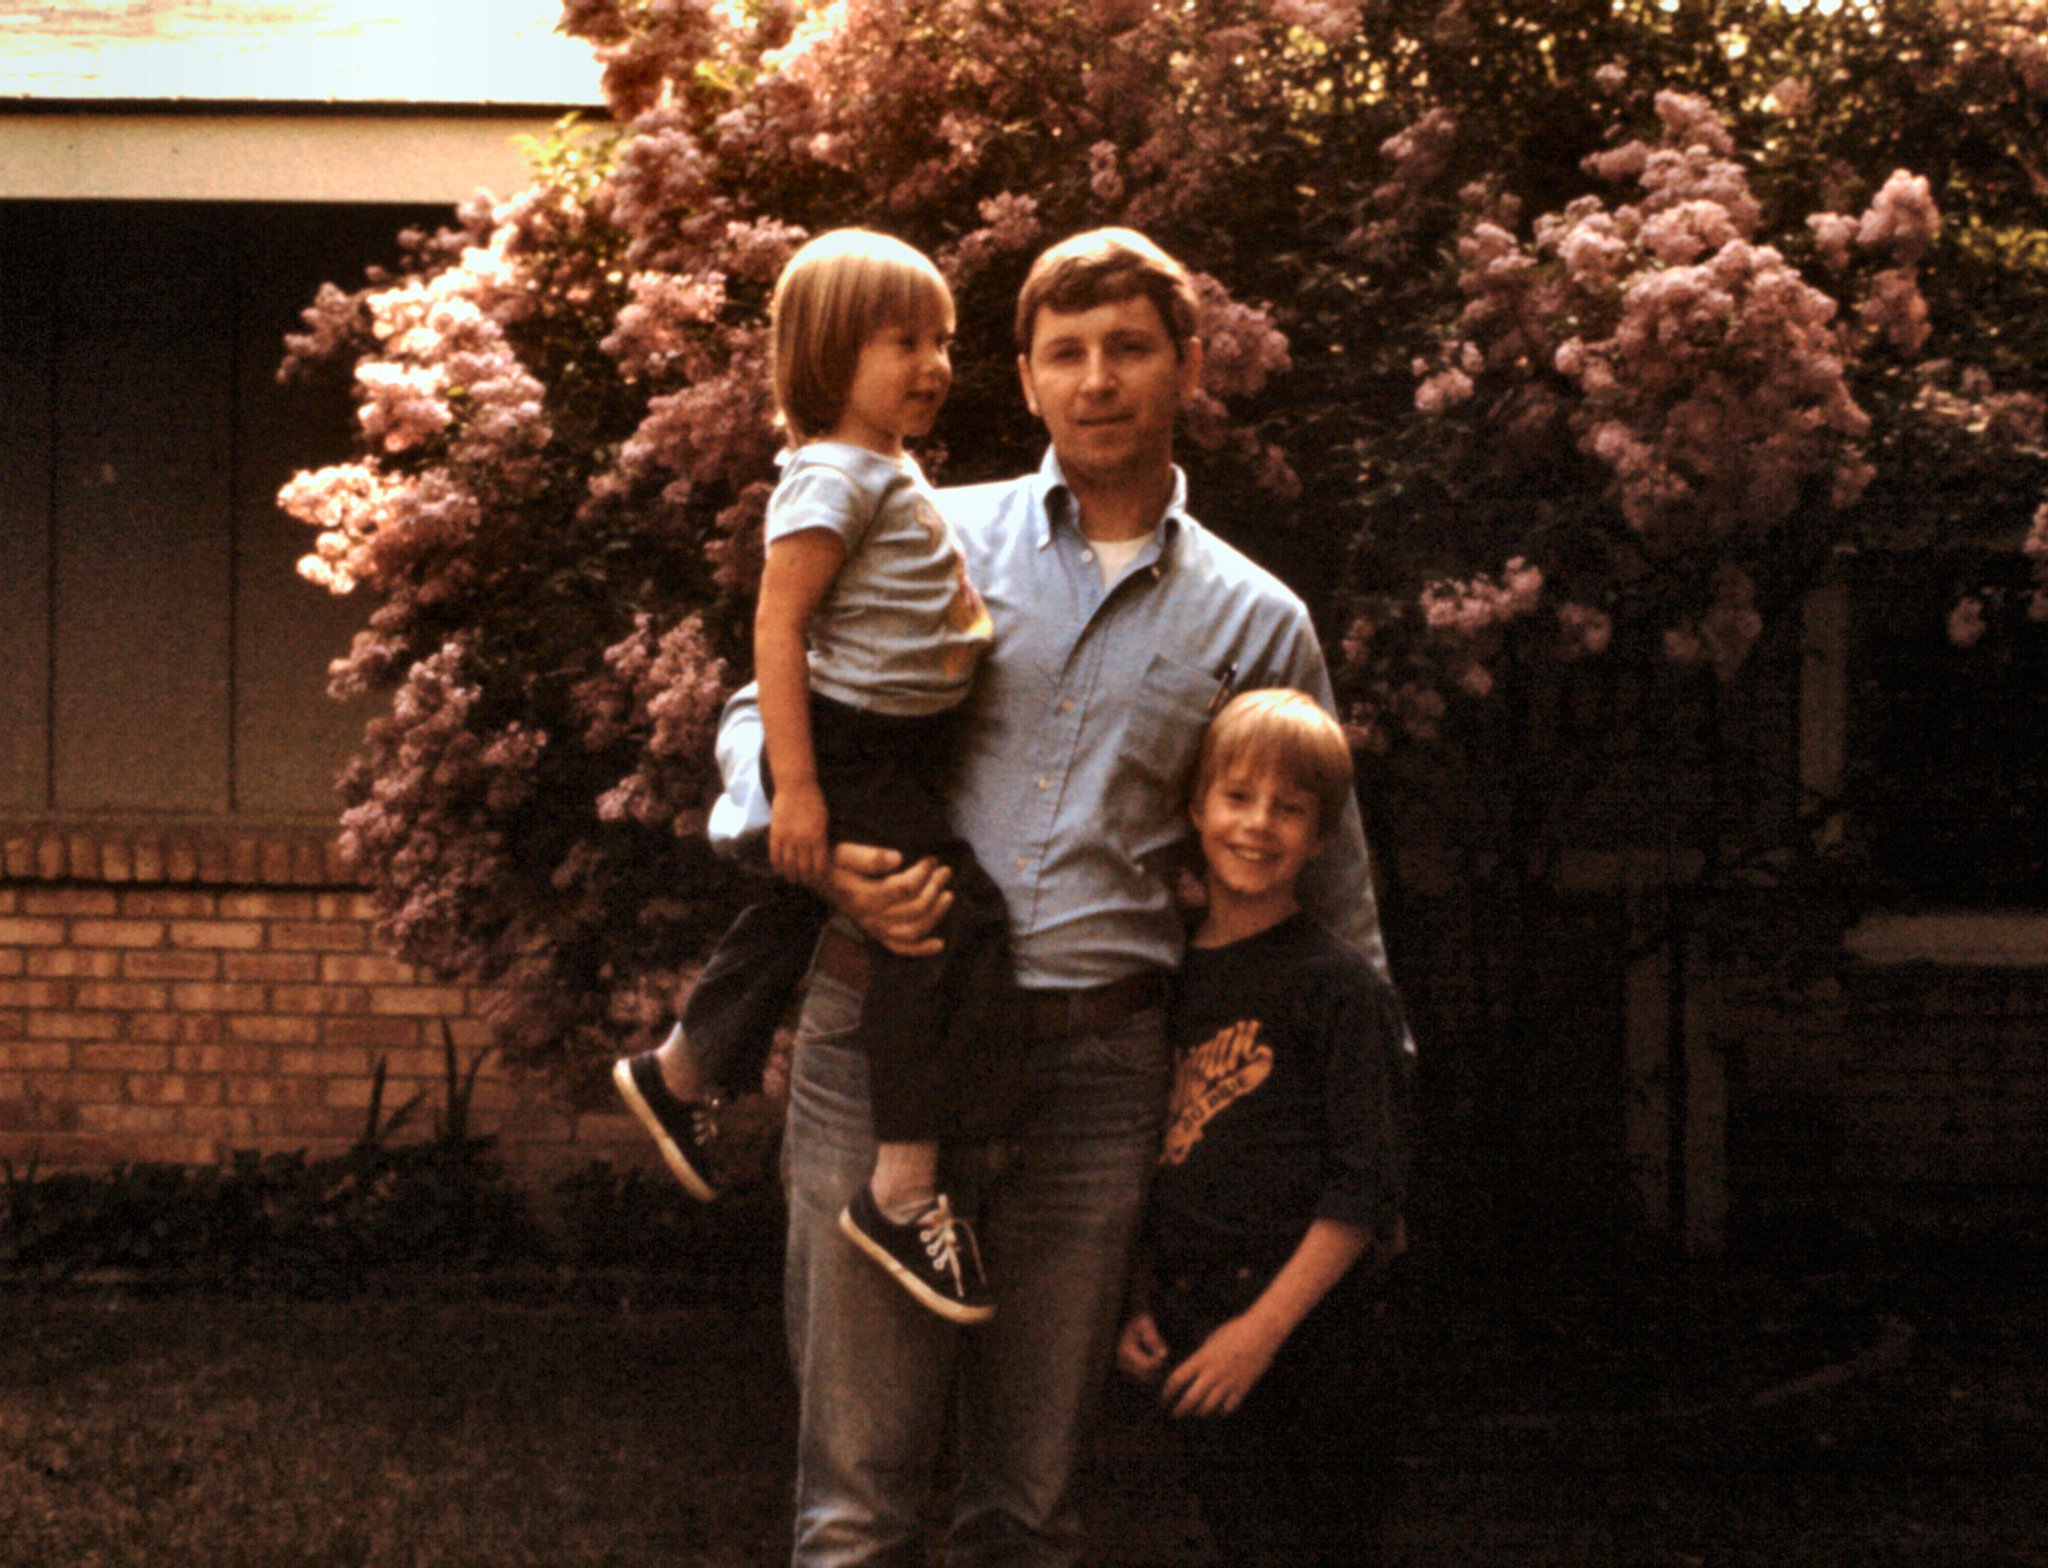  Darrel holding his daughter Beth and son, Mark, at his side. Midland, MI 1980. 